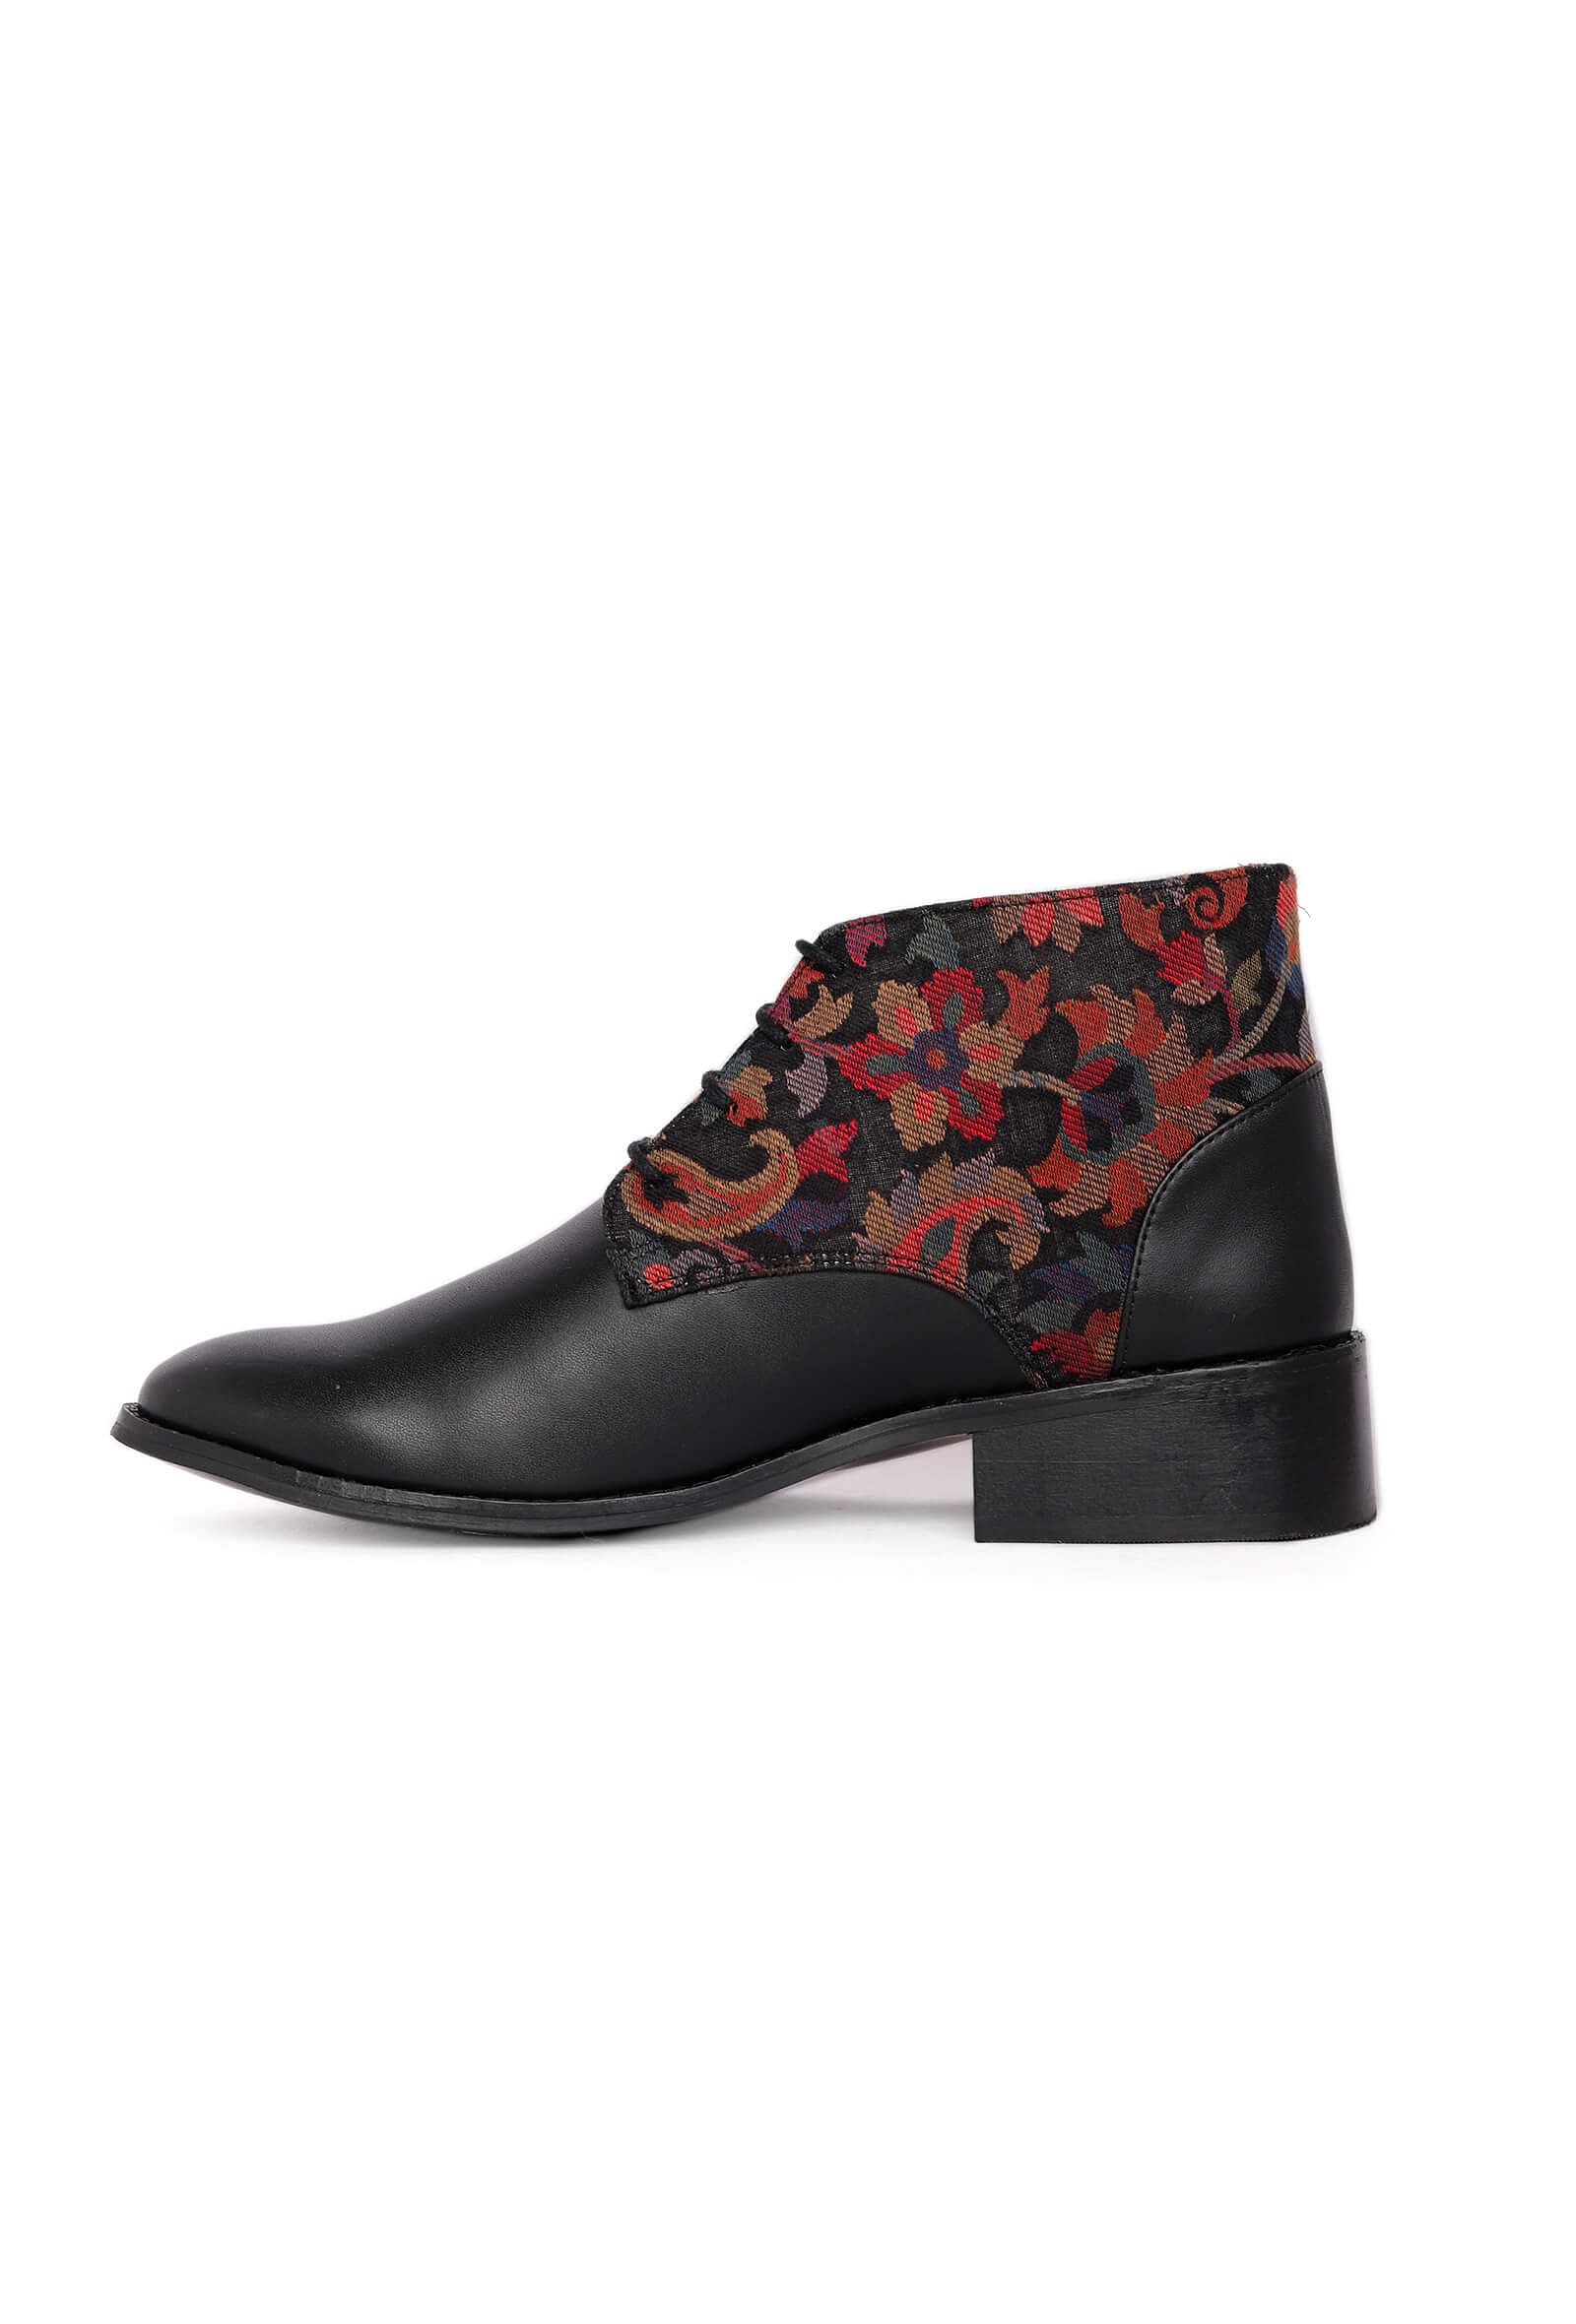 Black Kani Cruelty Free Leather High Boots